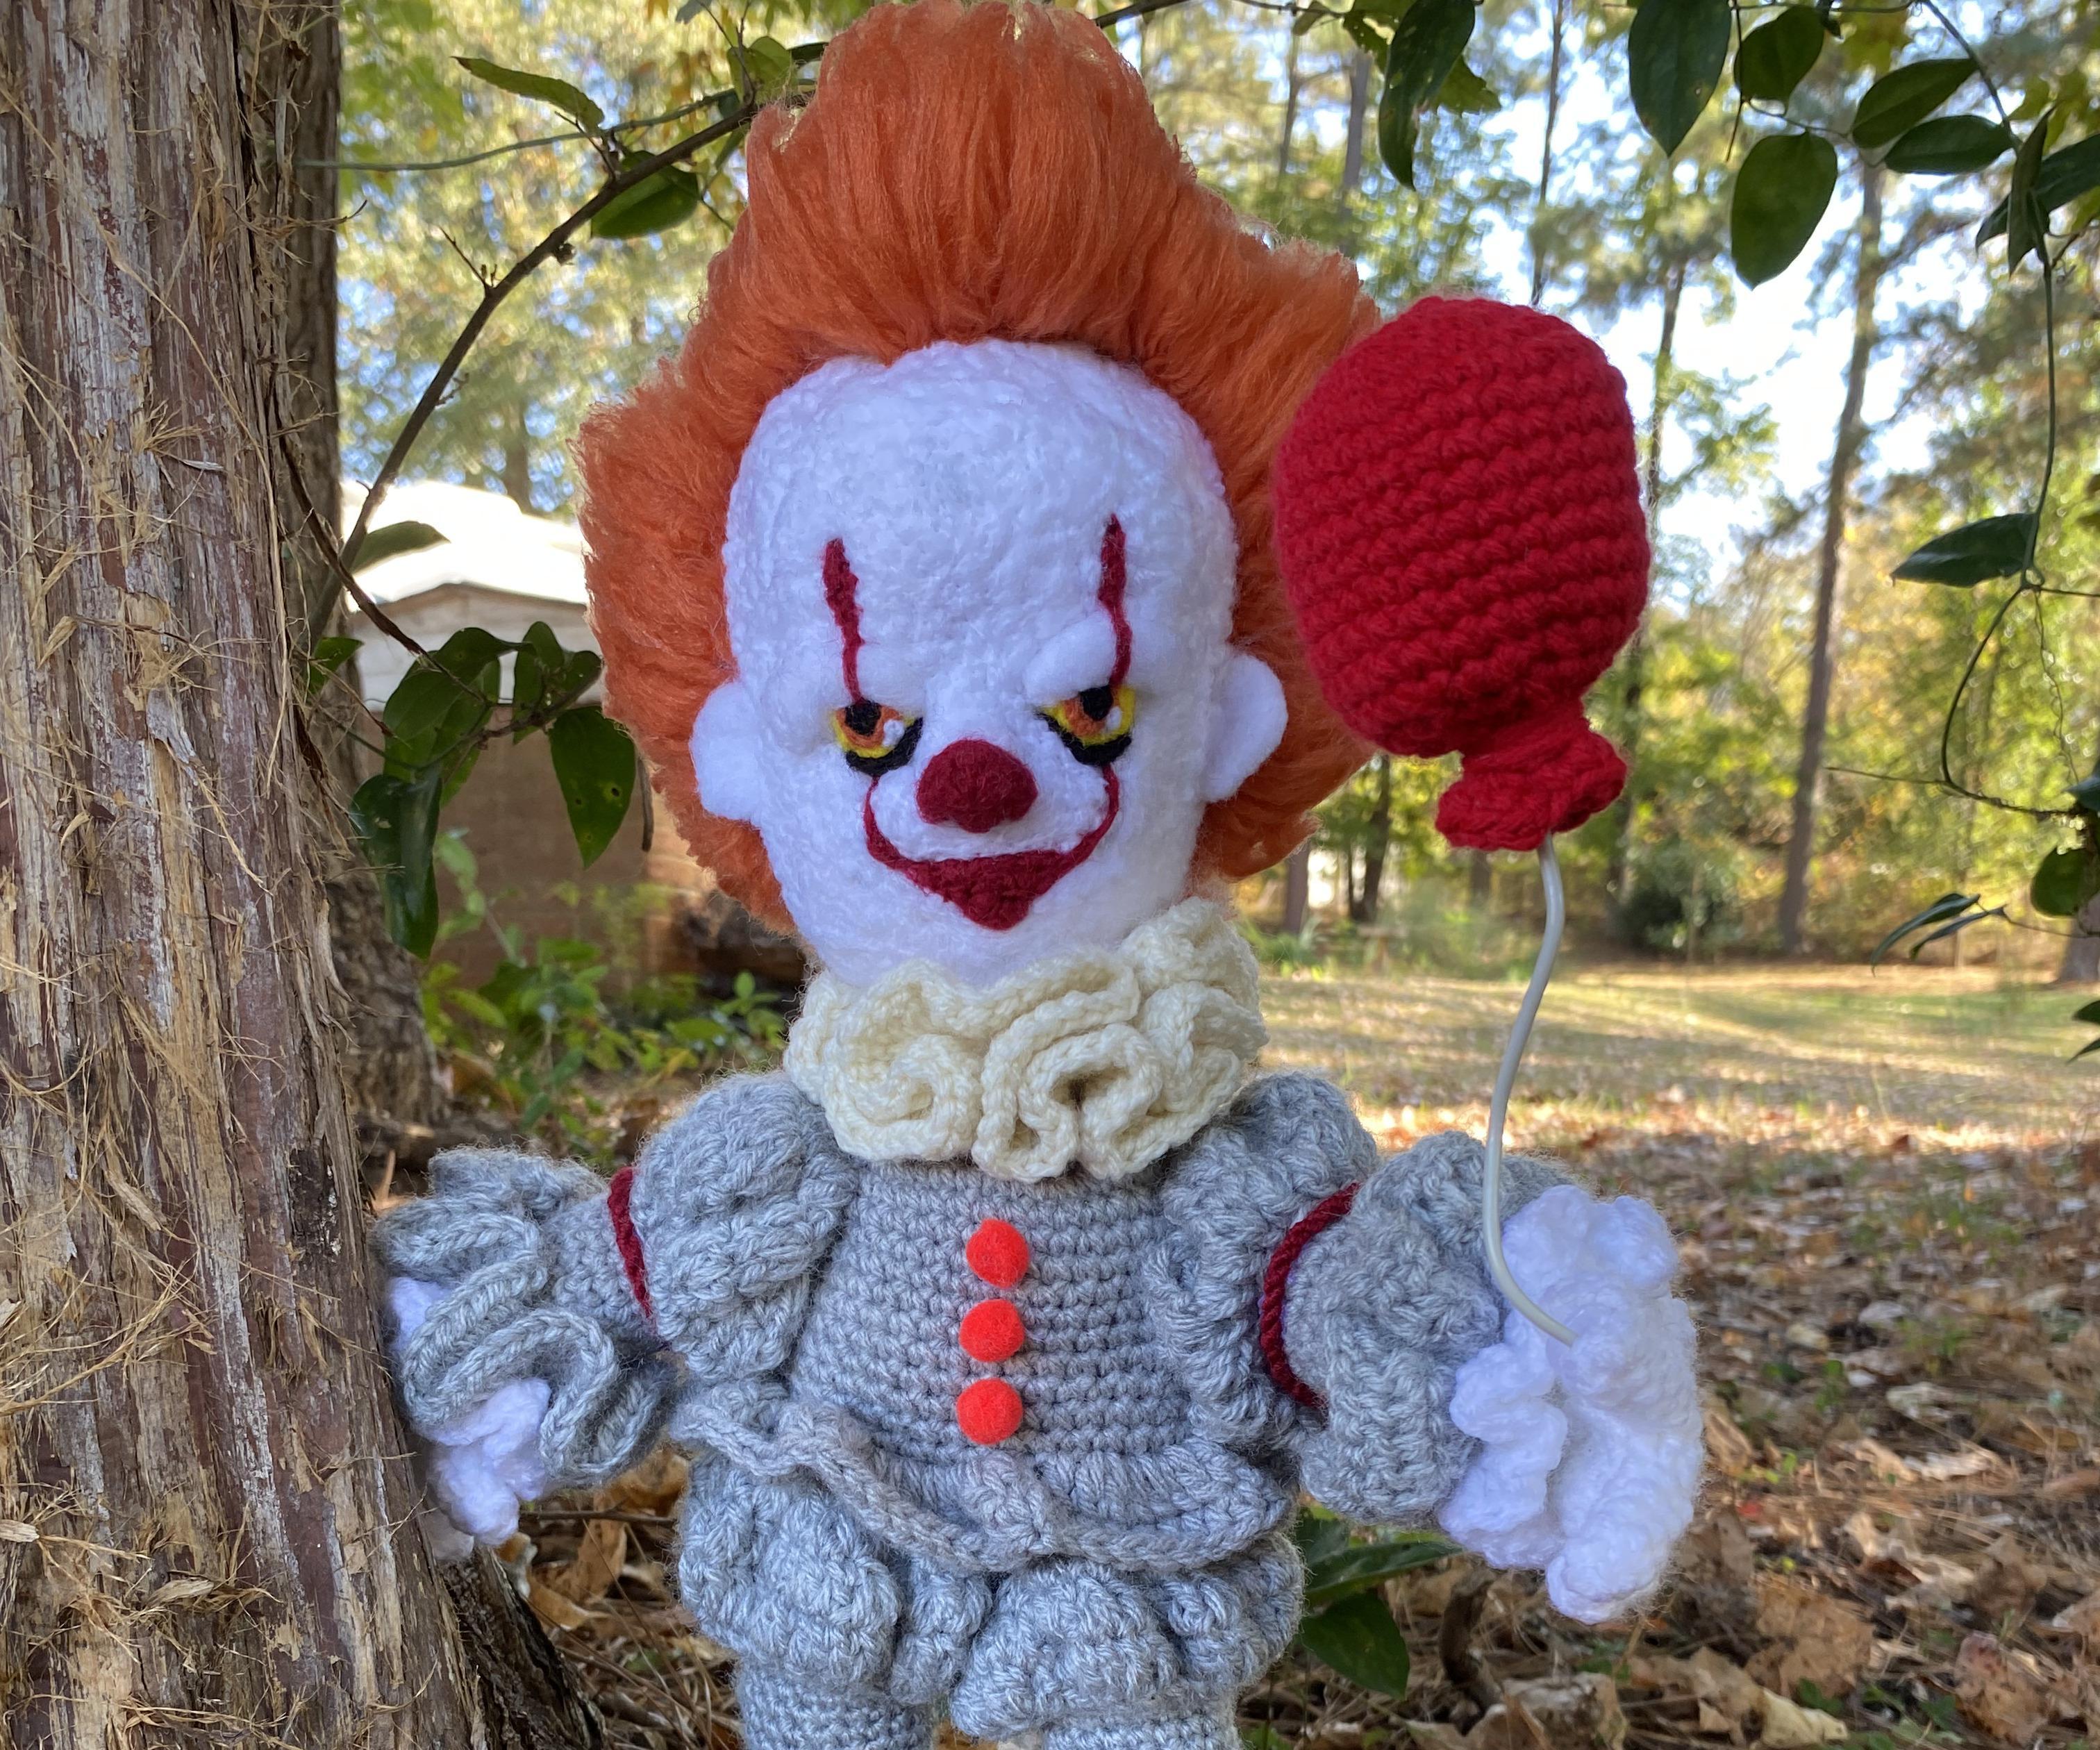 "Pennywise" Crochet and Felted Plush Inspired by Stephen King's "IT"